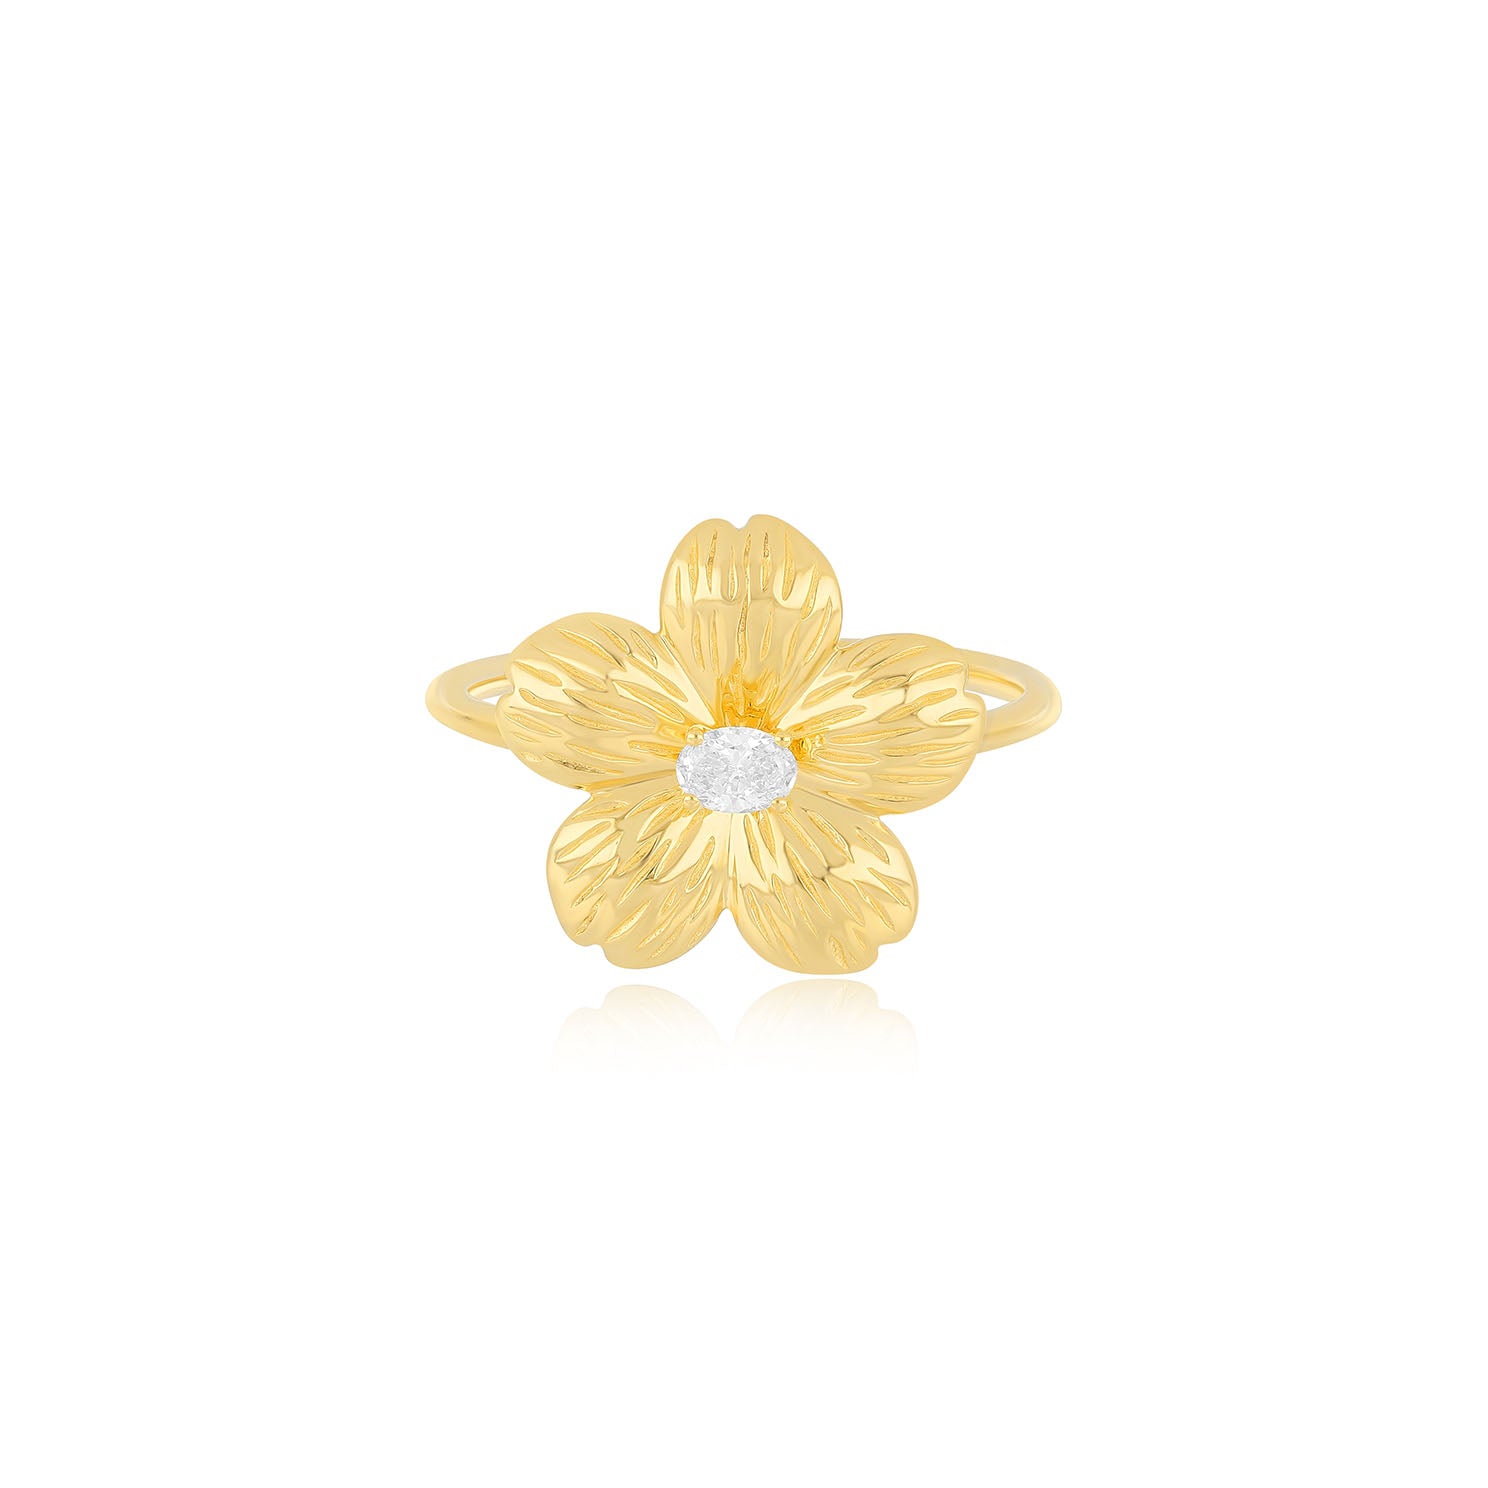 Cherry Blossom Ring in 14k yellow gold